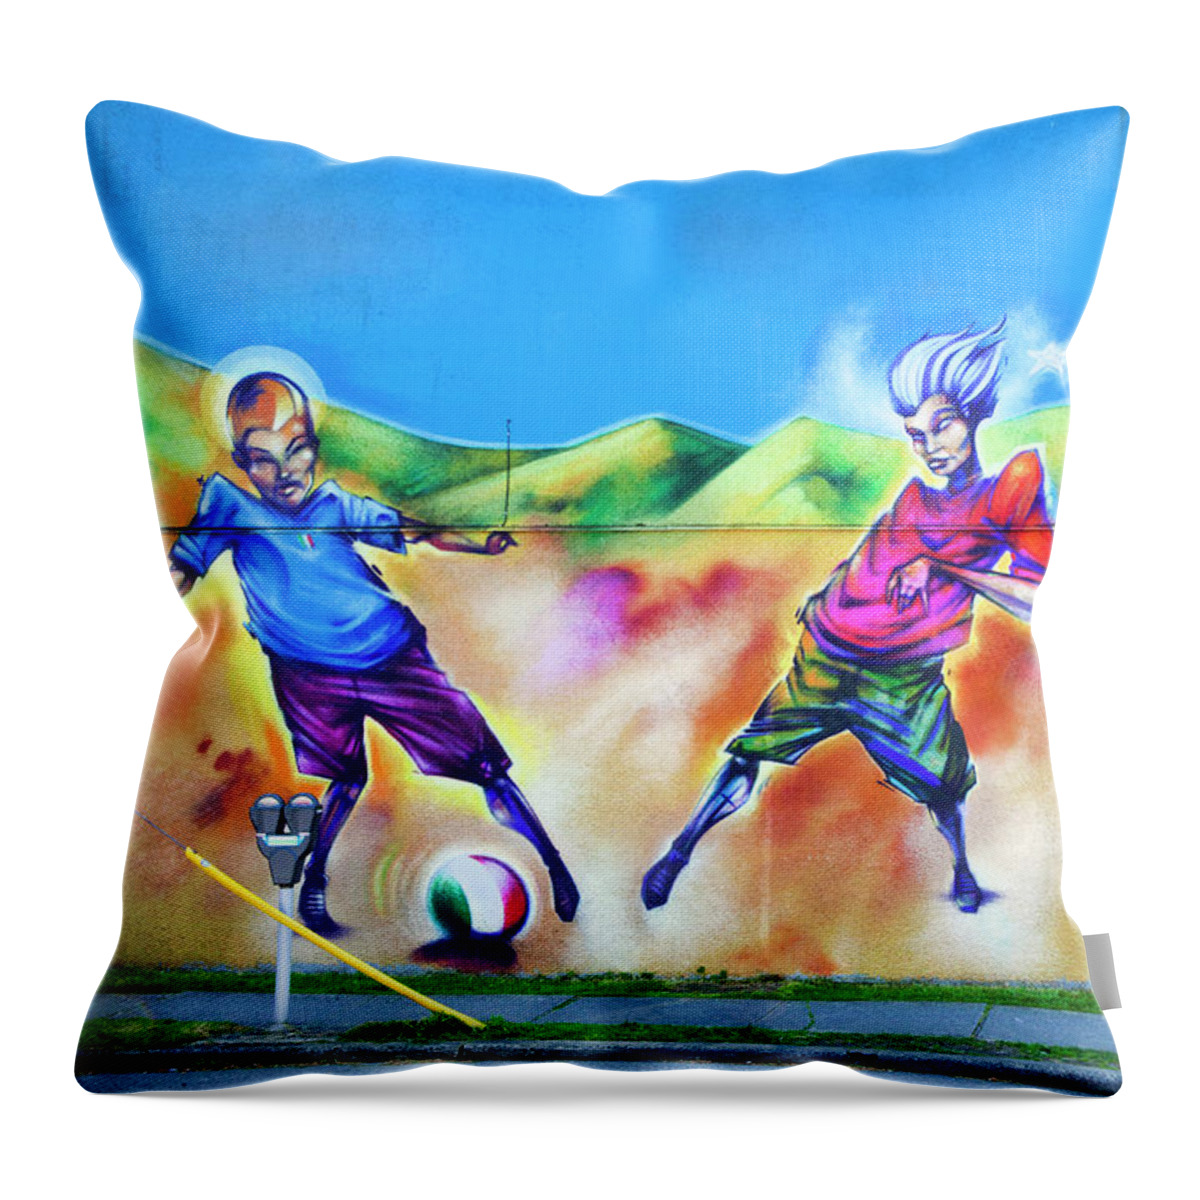 Colorful Throw Pillow featuring the photograph Soccer Graffiti by Theresa Tahara